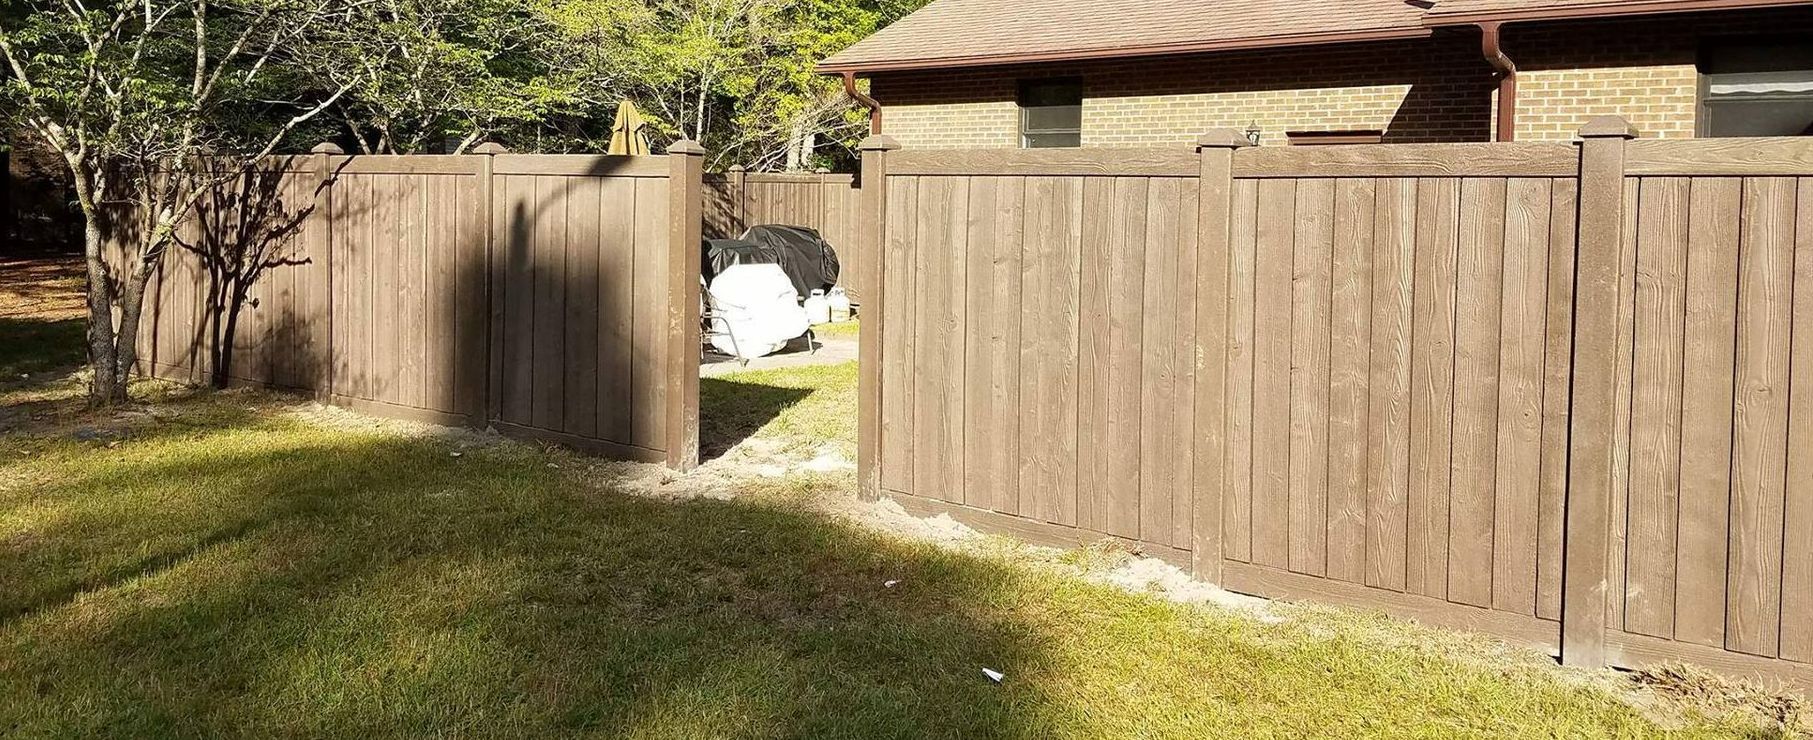 A wooden fence is in the backyard of a house.